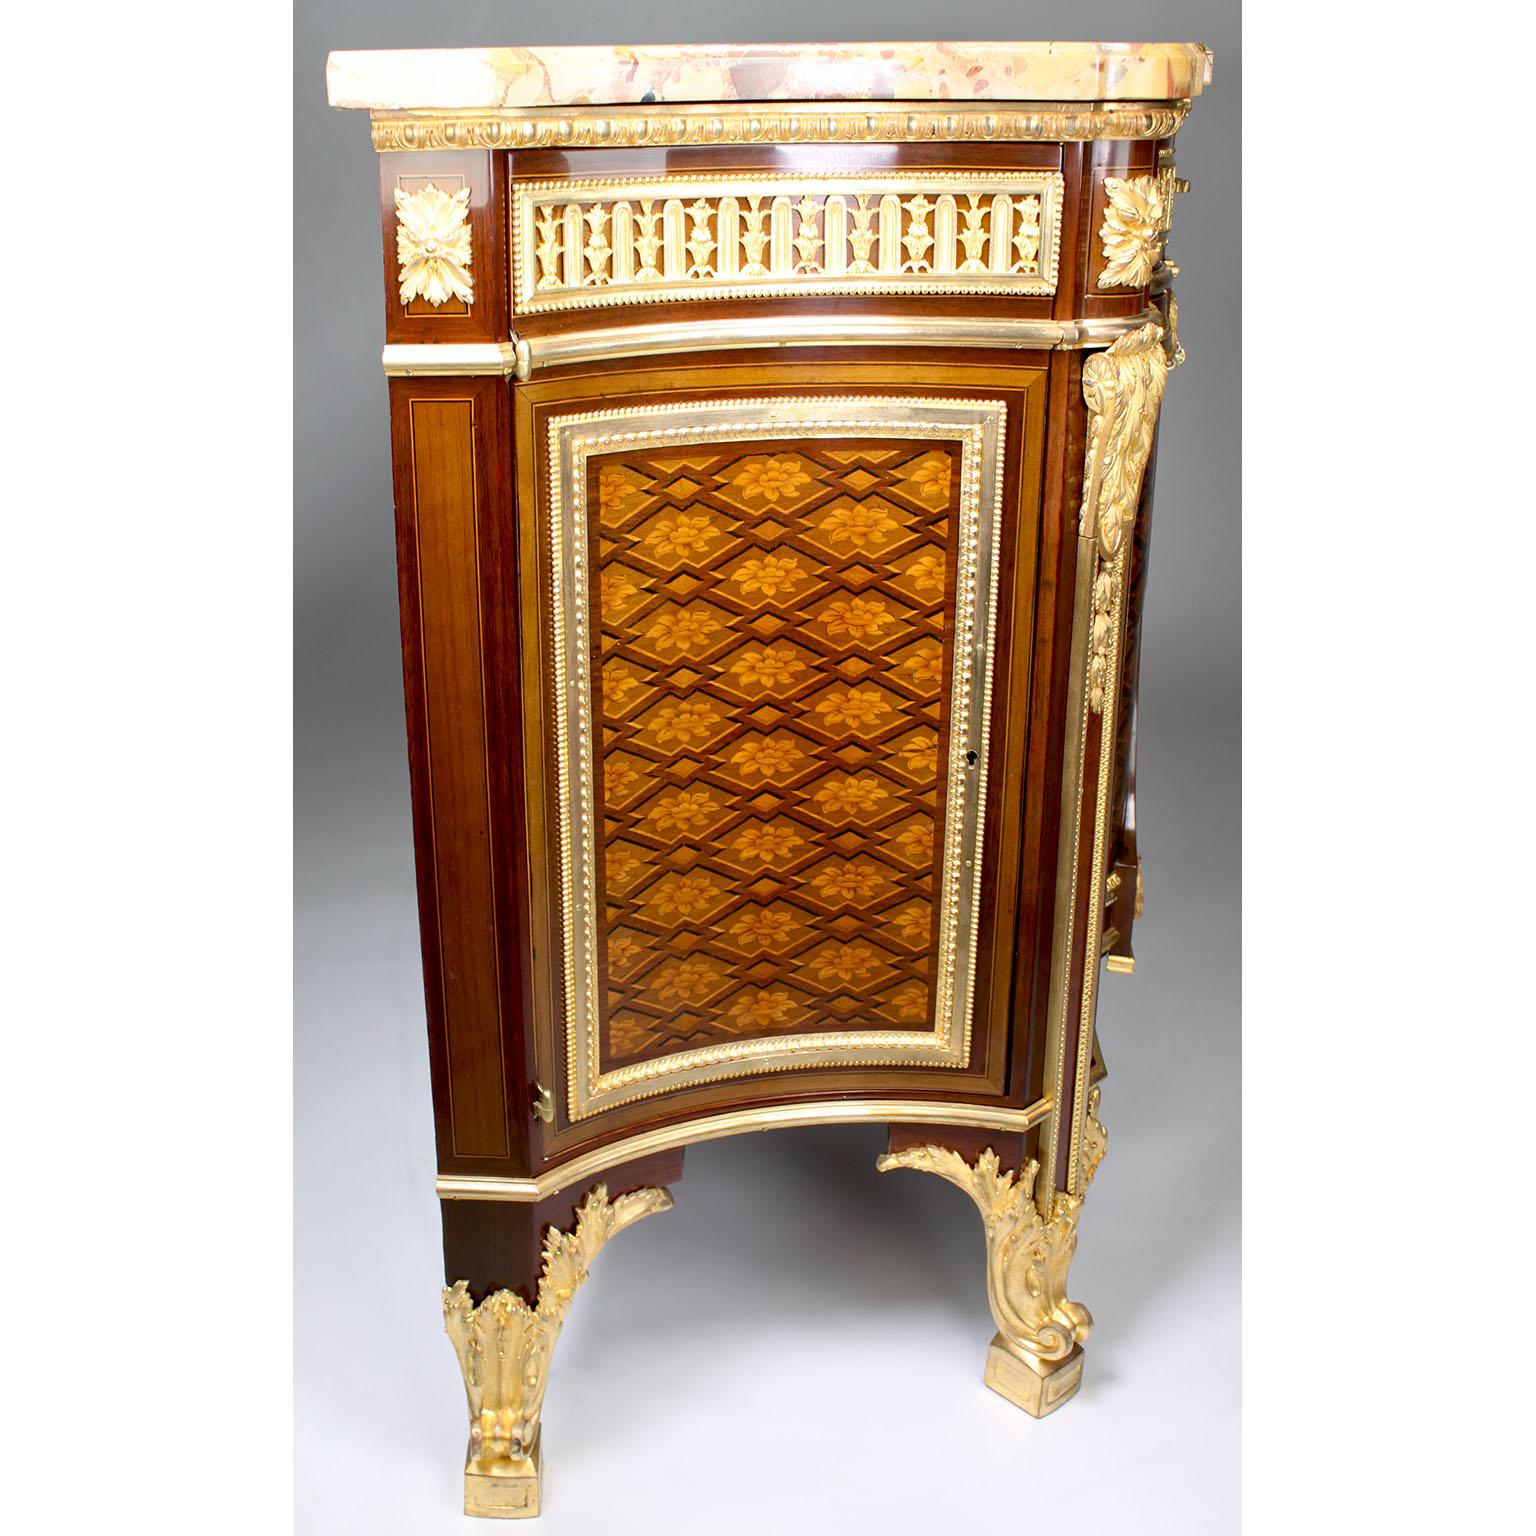 French 19th Century Louis XV-XVI Ormolu Mounted Marquetry Commode Marble Top For Sale 8